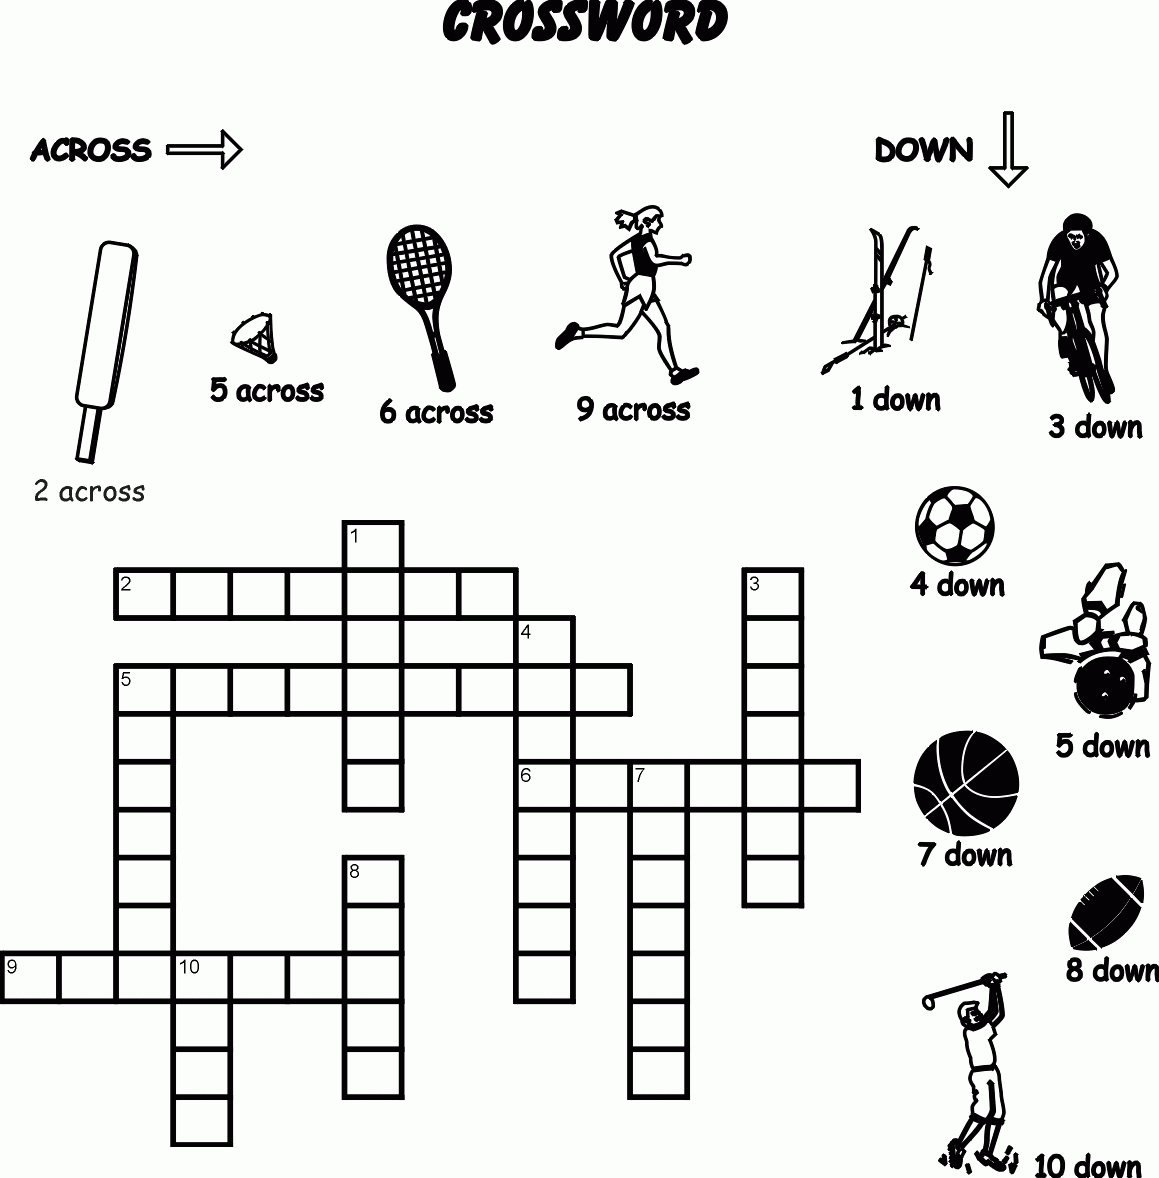 14 Sports Crossword Puzzles | Kittybabylove - Printable Sports Crossword Puzzles With Answers